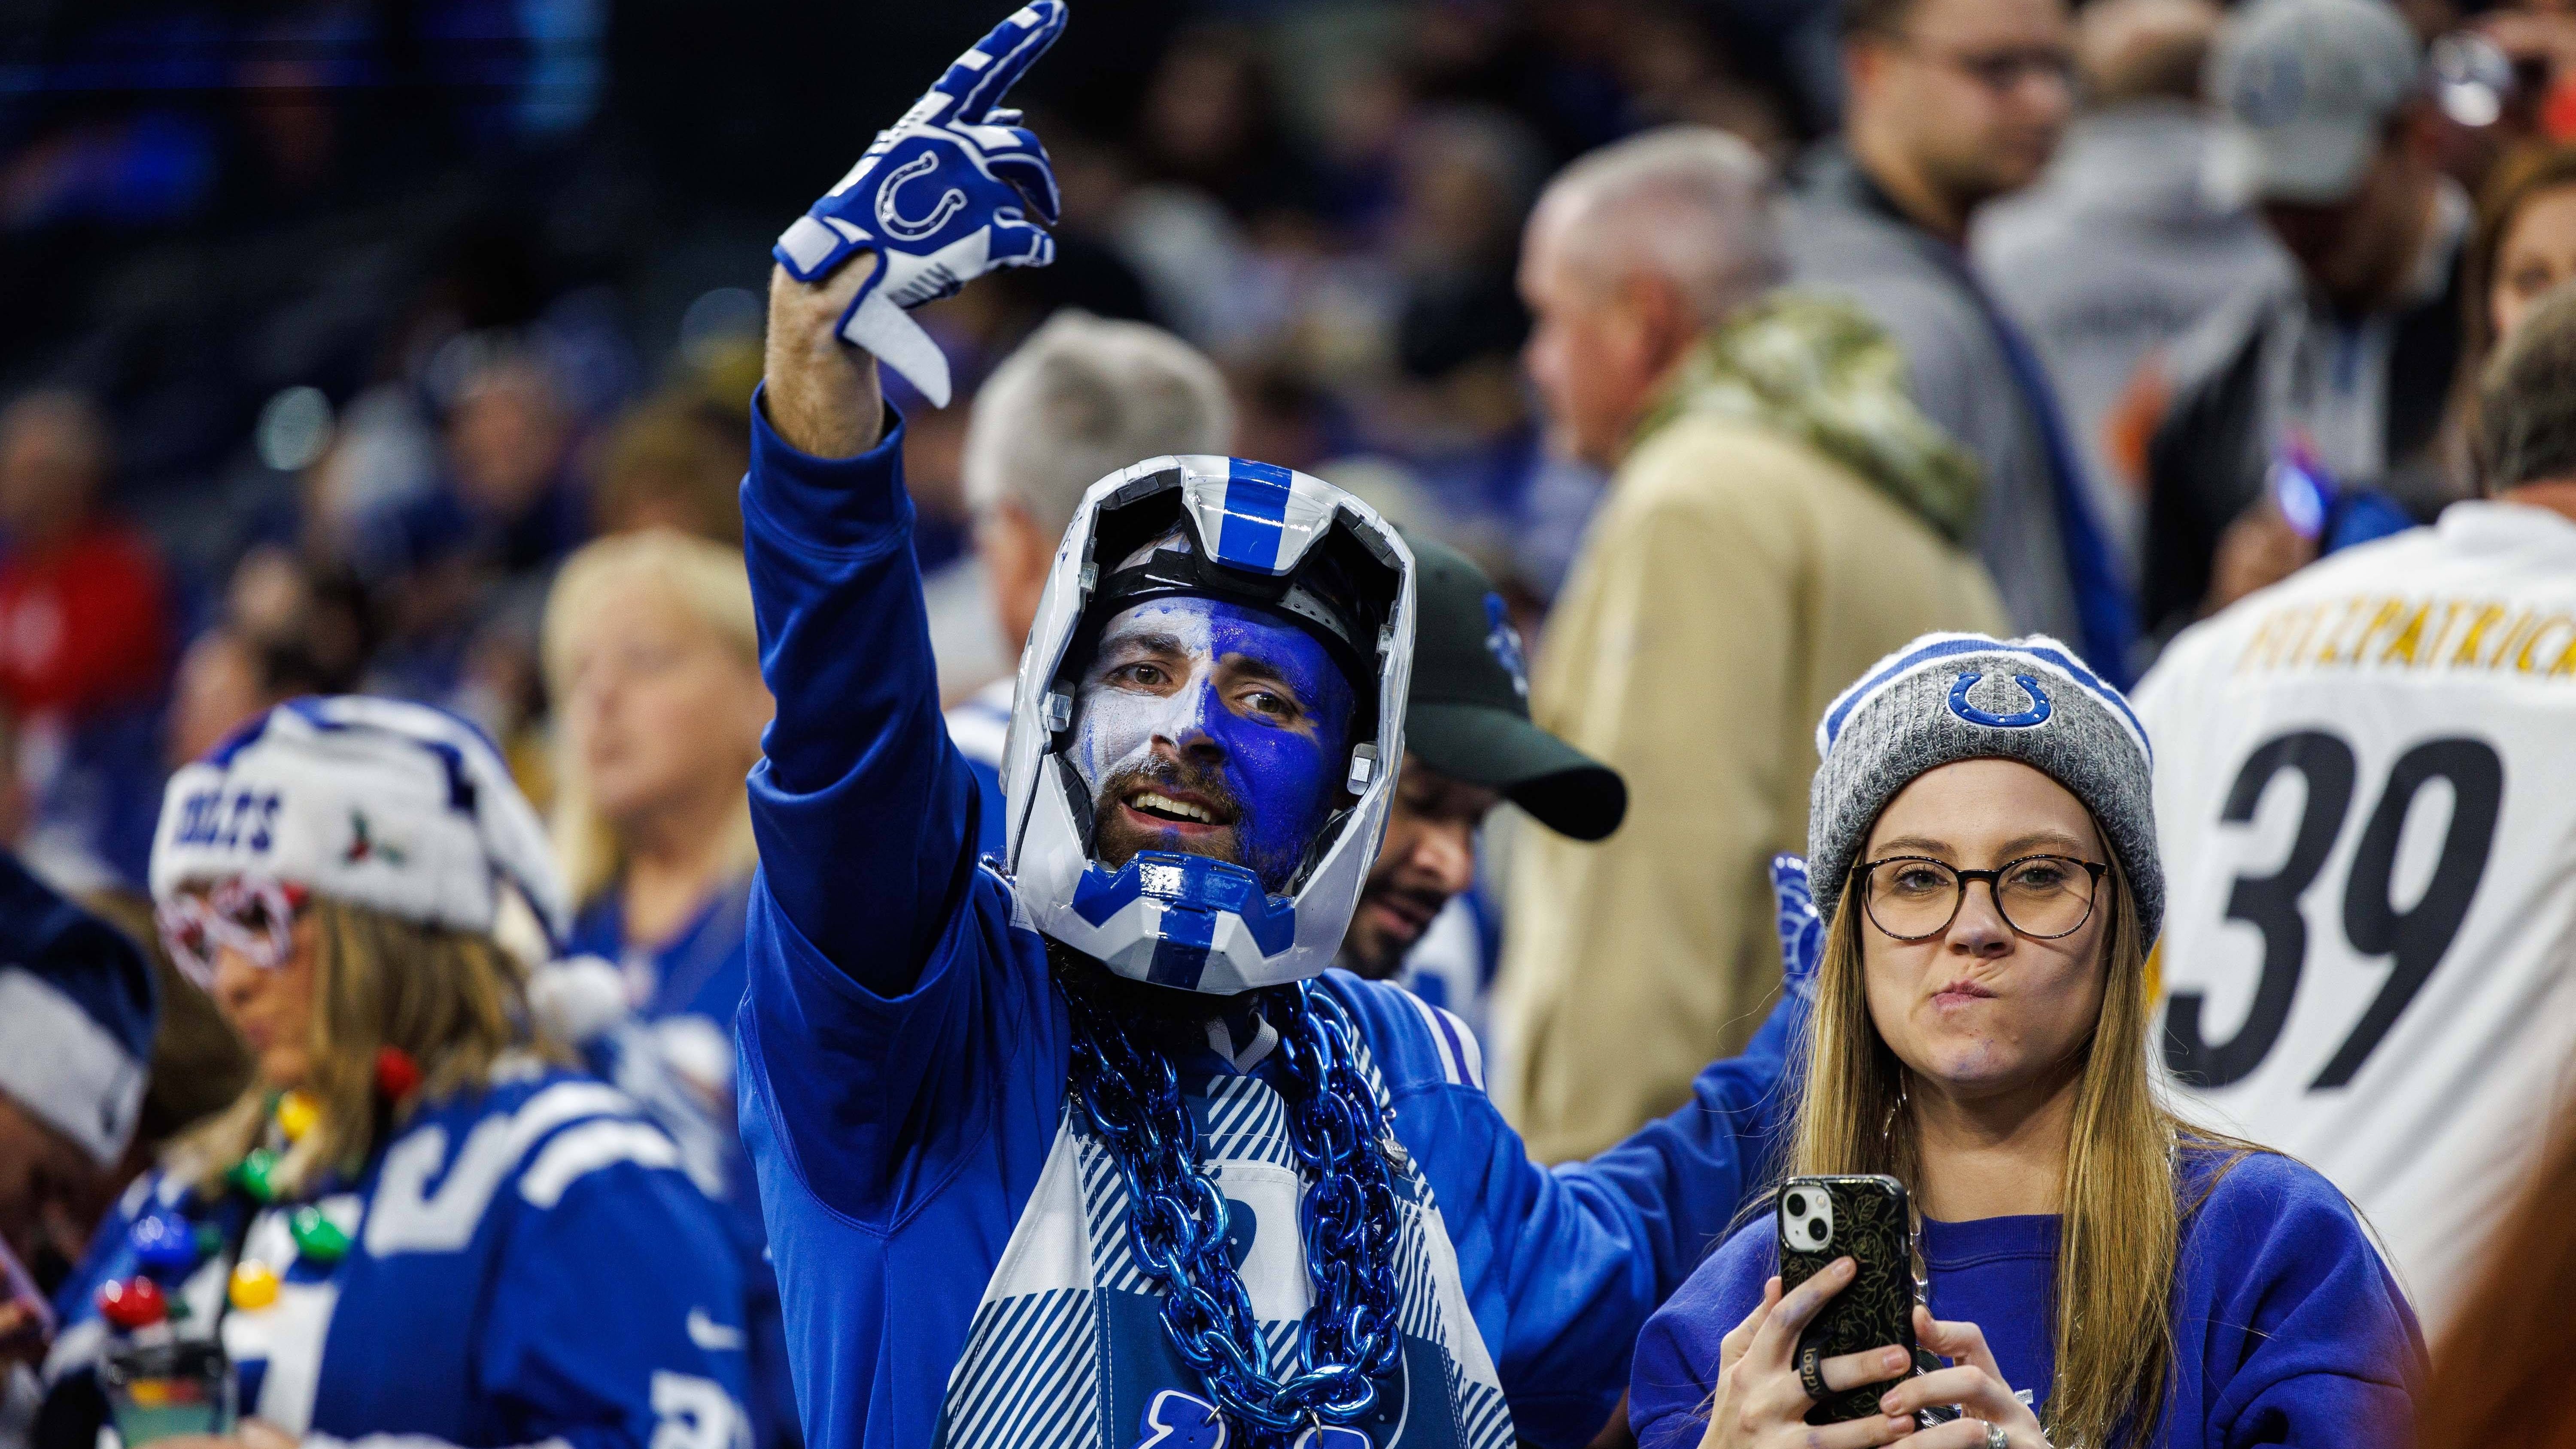 <strong>Platz 3 (geteilt): Indianapolis Colts</strong><br>0,85 Promille